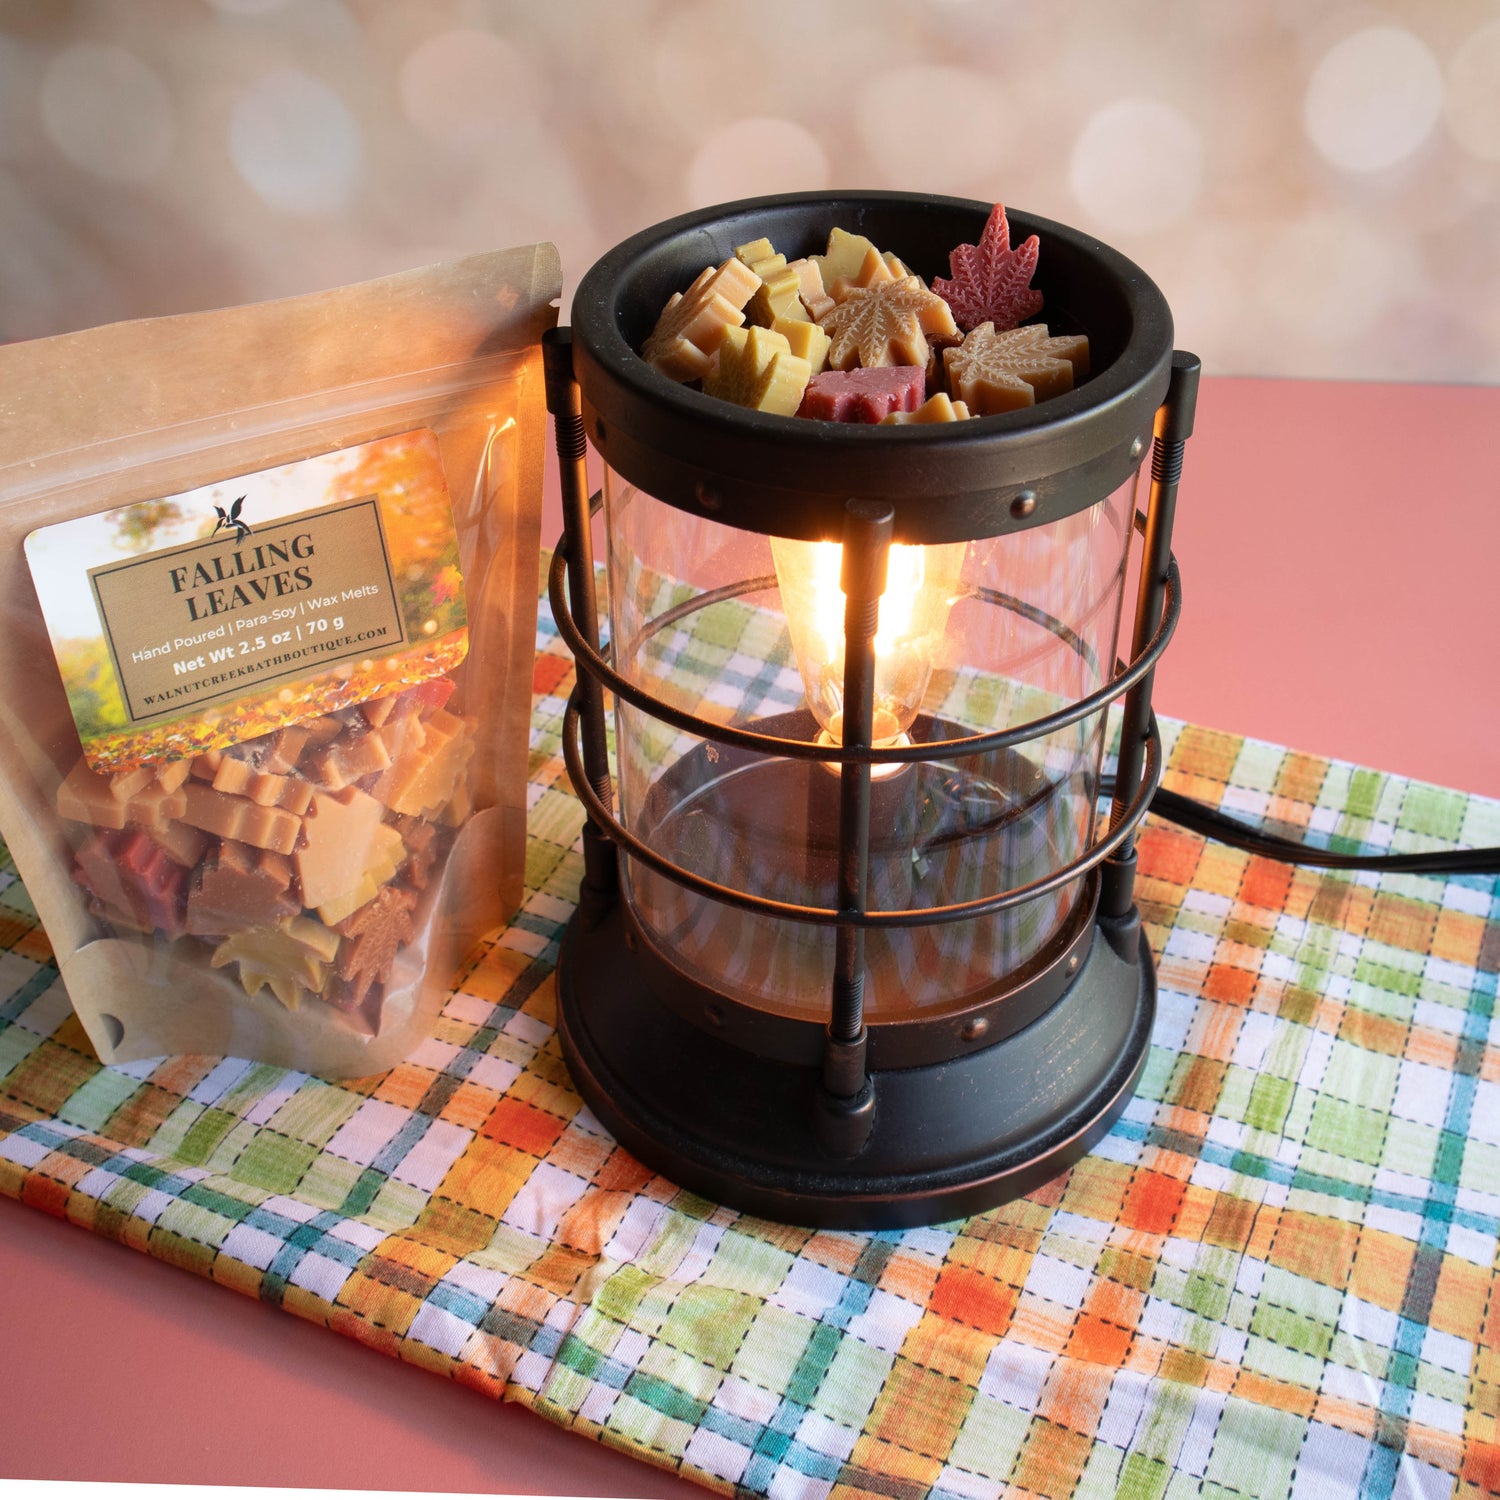 falling leaves wax melts in their bag sitting next to a wax burner filled with the small melts. Colors of red, yellow and orange!. This is sitting on a plaid clothe with the fall colors of green, red, orange, yellow and a touch of blue.